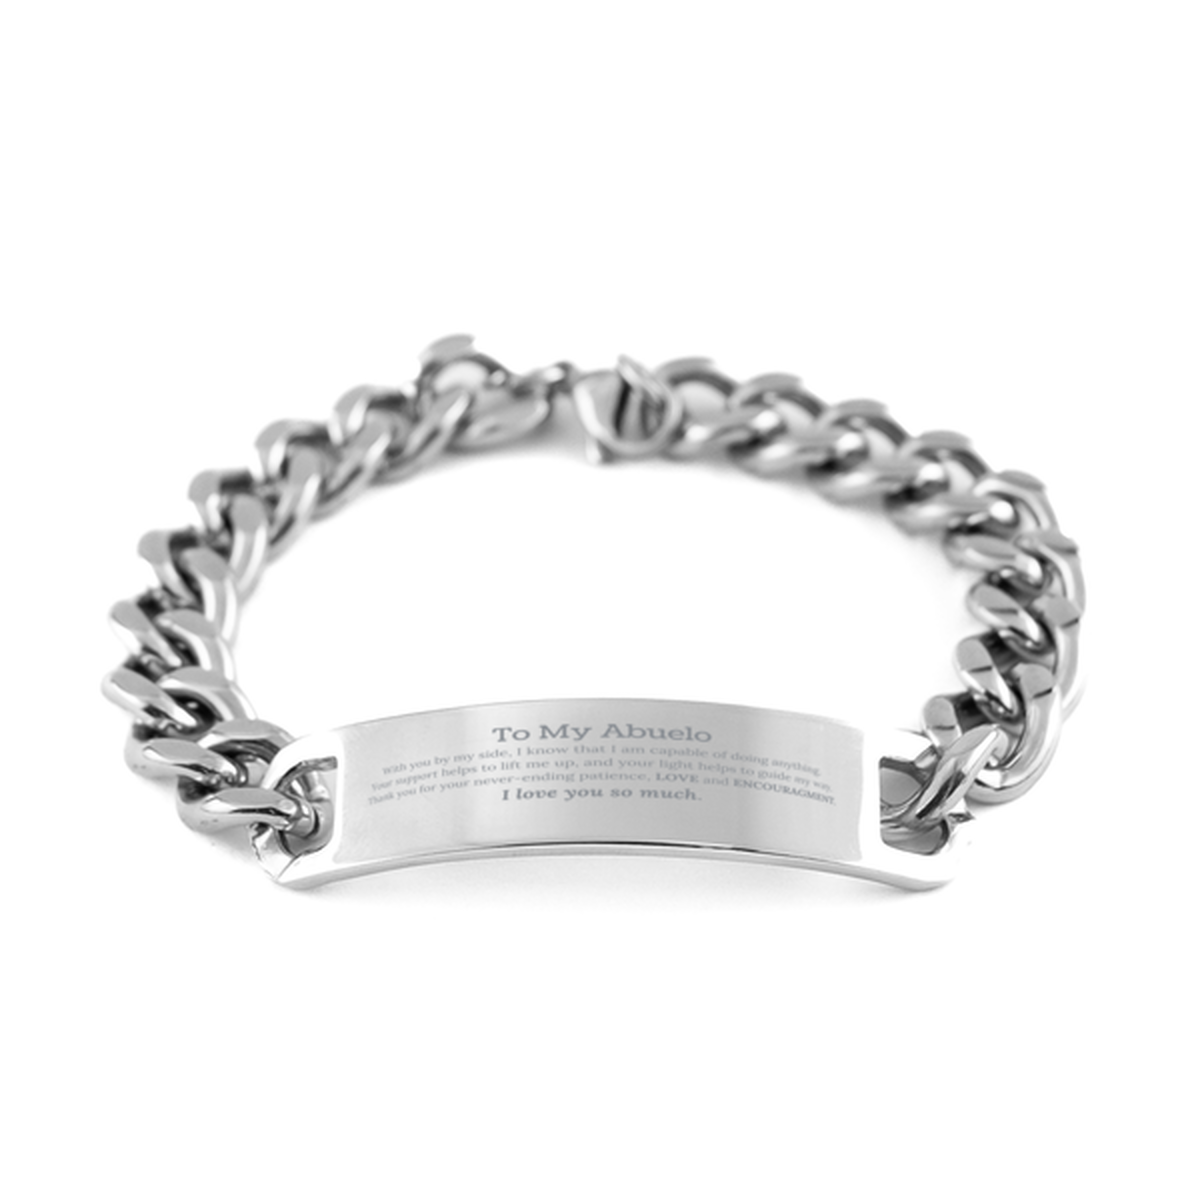 Appreciation Abuelo Cuban Chain Stainless Steel Bracelet Gifts, To My Abuelo Birthday Christmas Wedding Keepsake Gifts for Abuelo With you by my side, I know that I am capable of doing anything. I love you so much